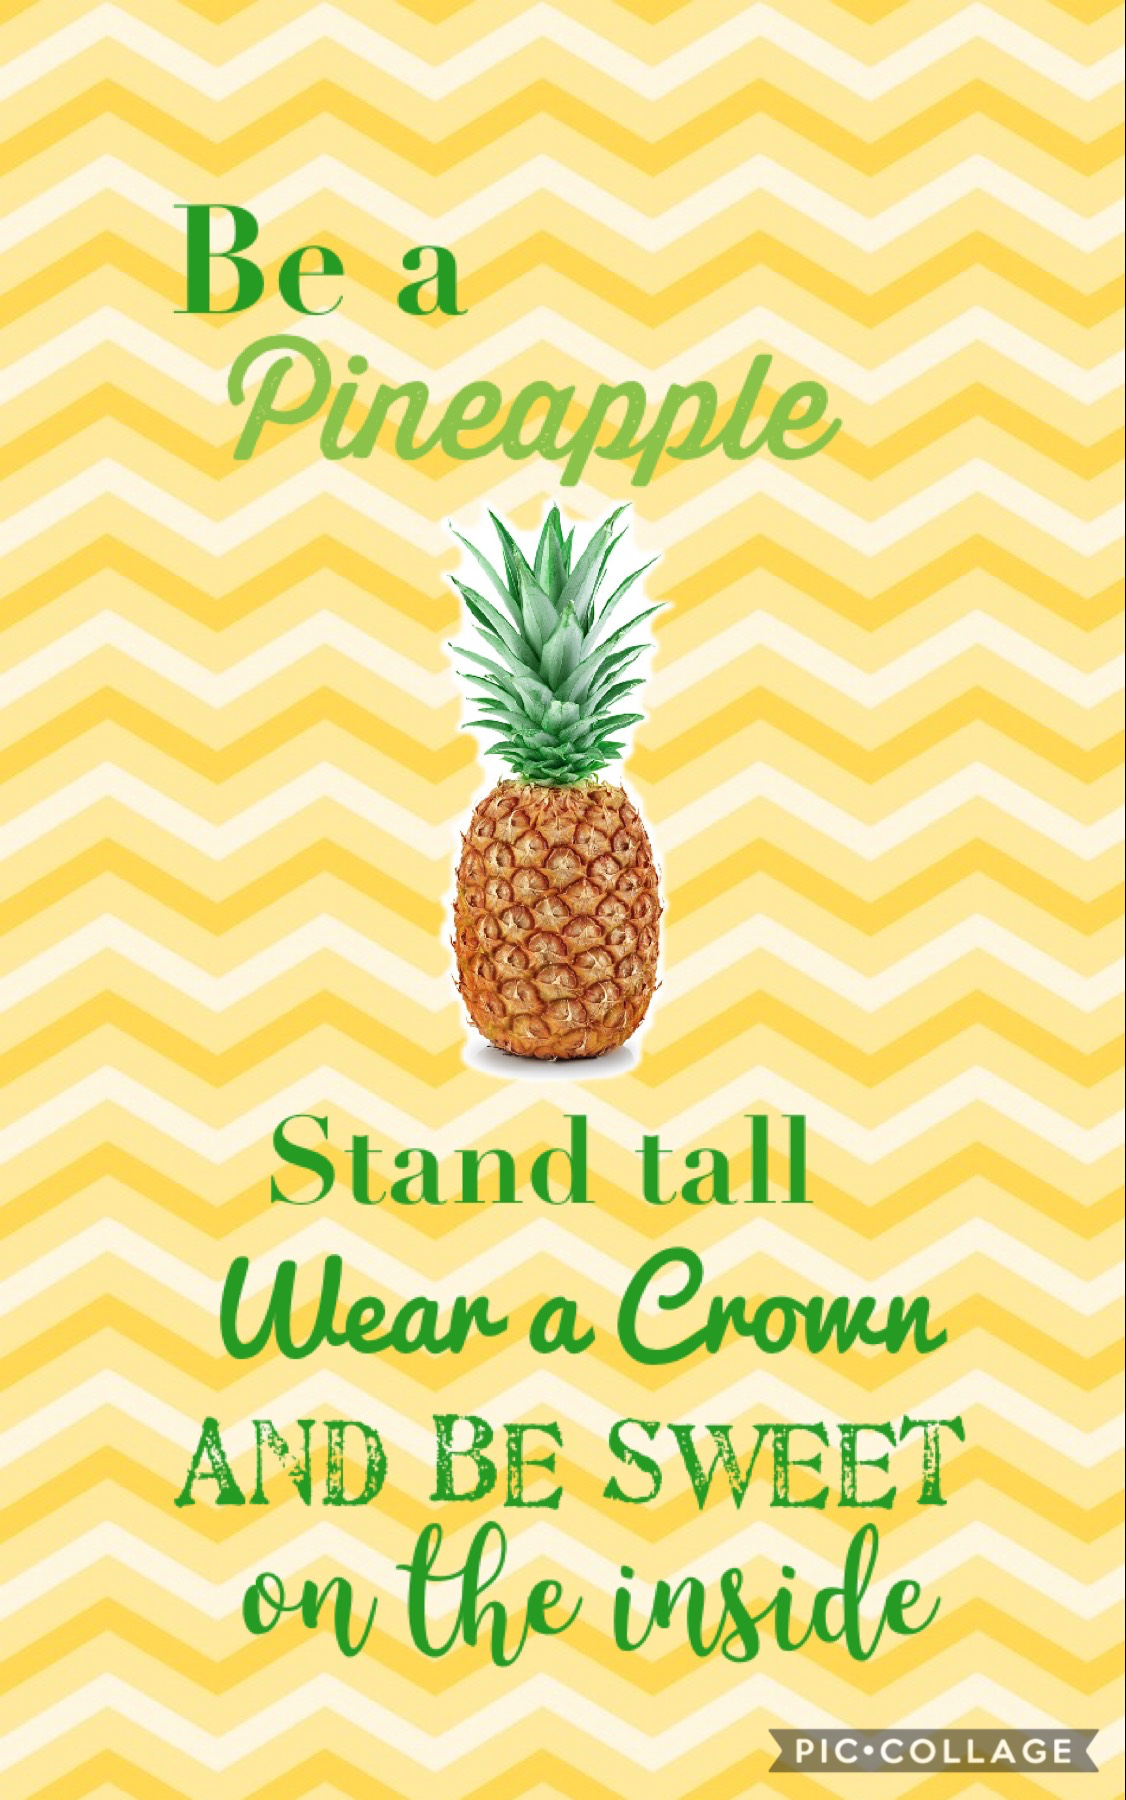 Be a Pineapple! 🍍🍍